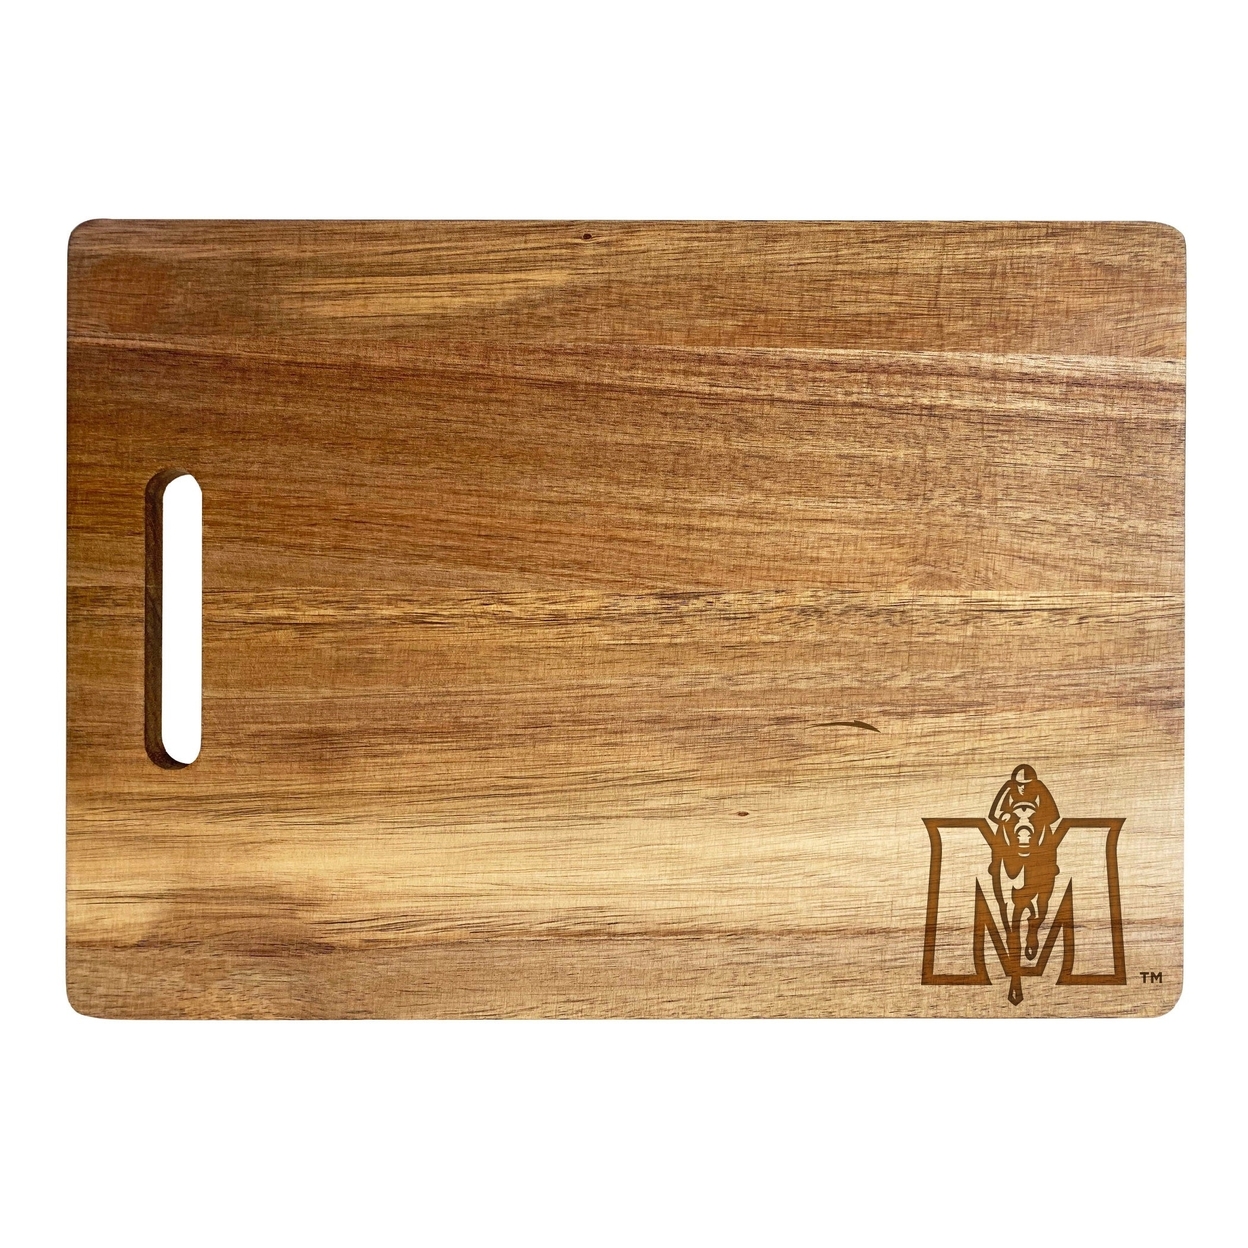 Murray State University Engraved Wooden Cutting Board 10 X 14 Acacia Wood - Small Engraving